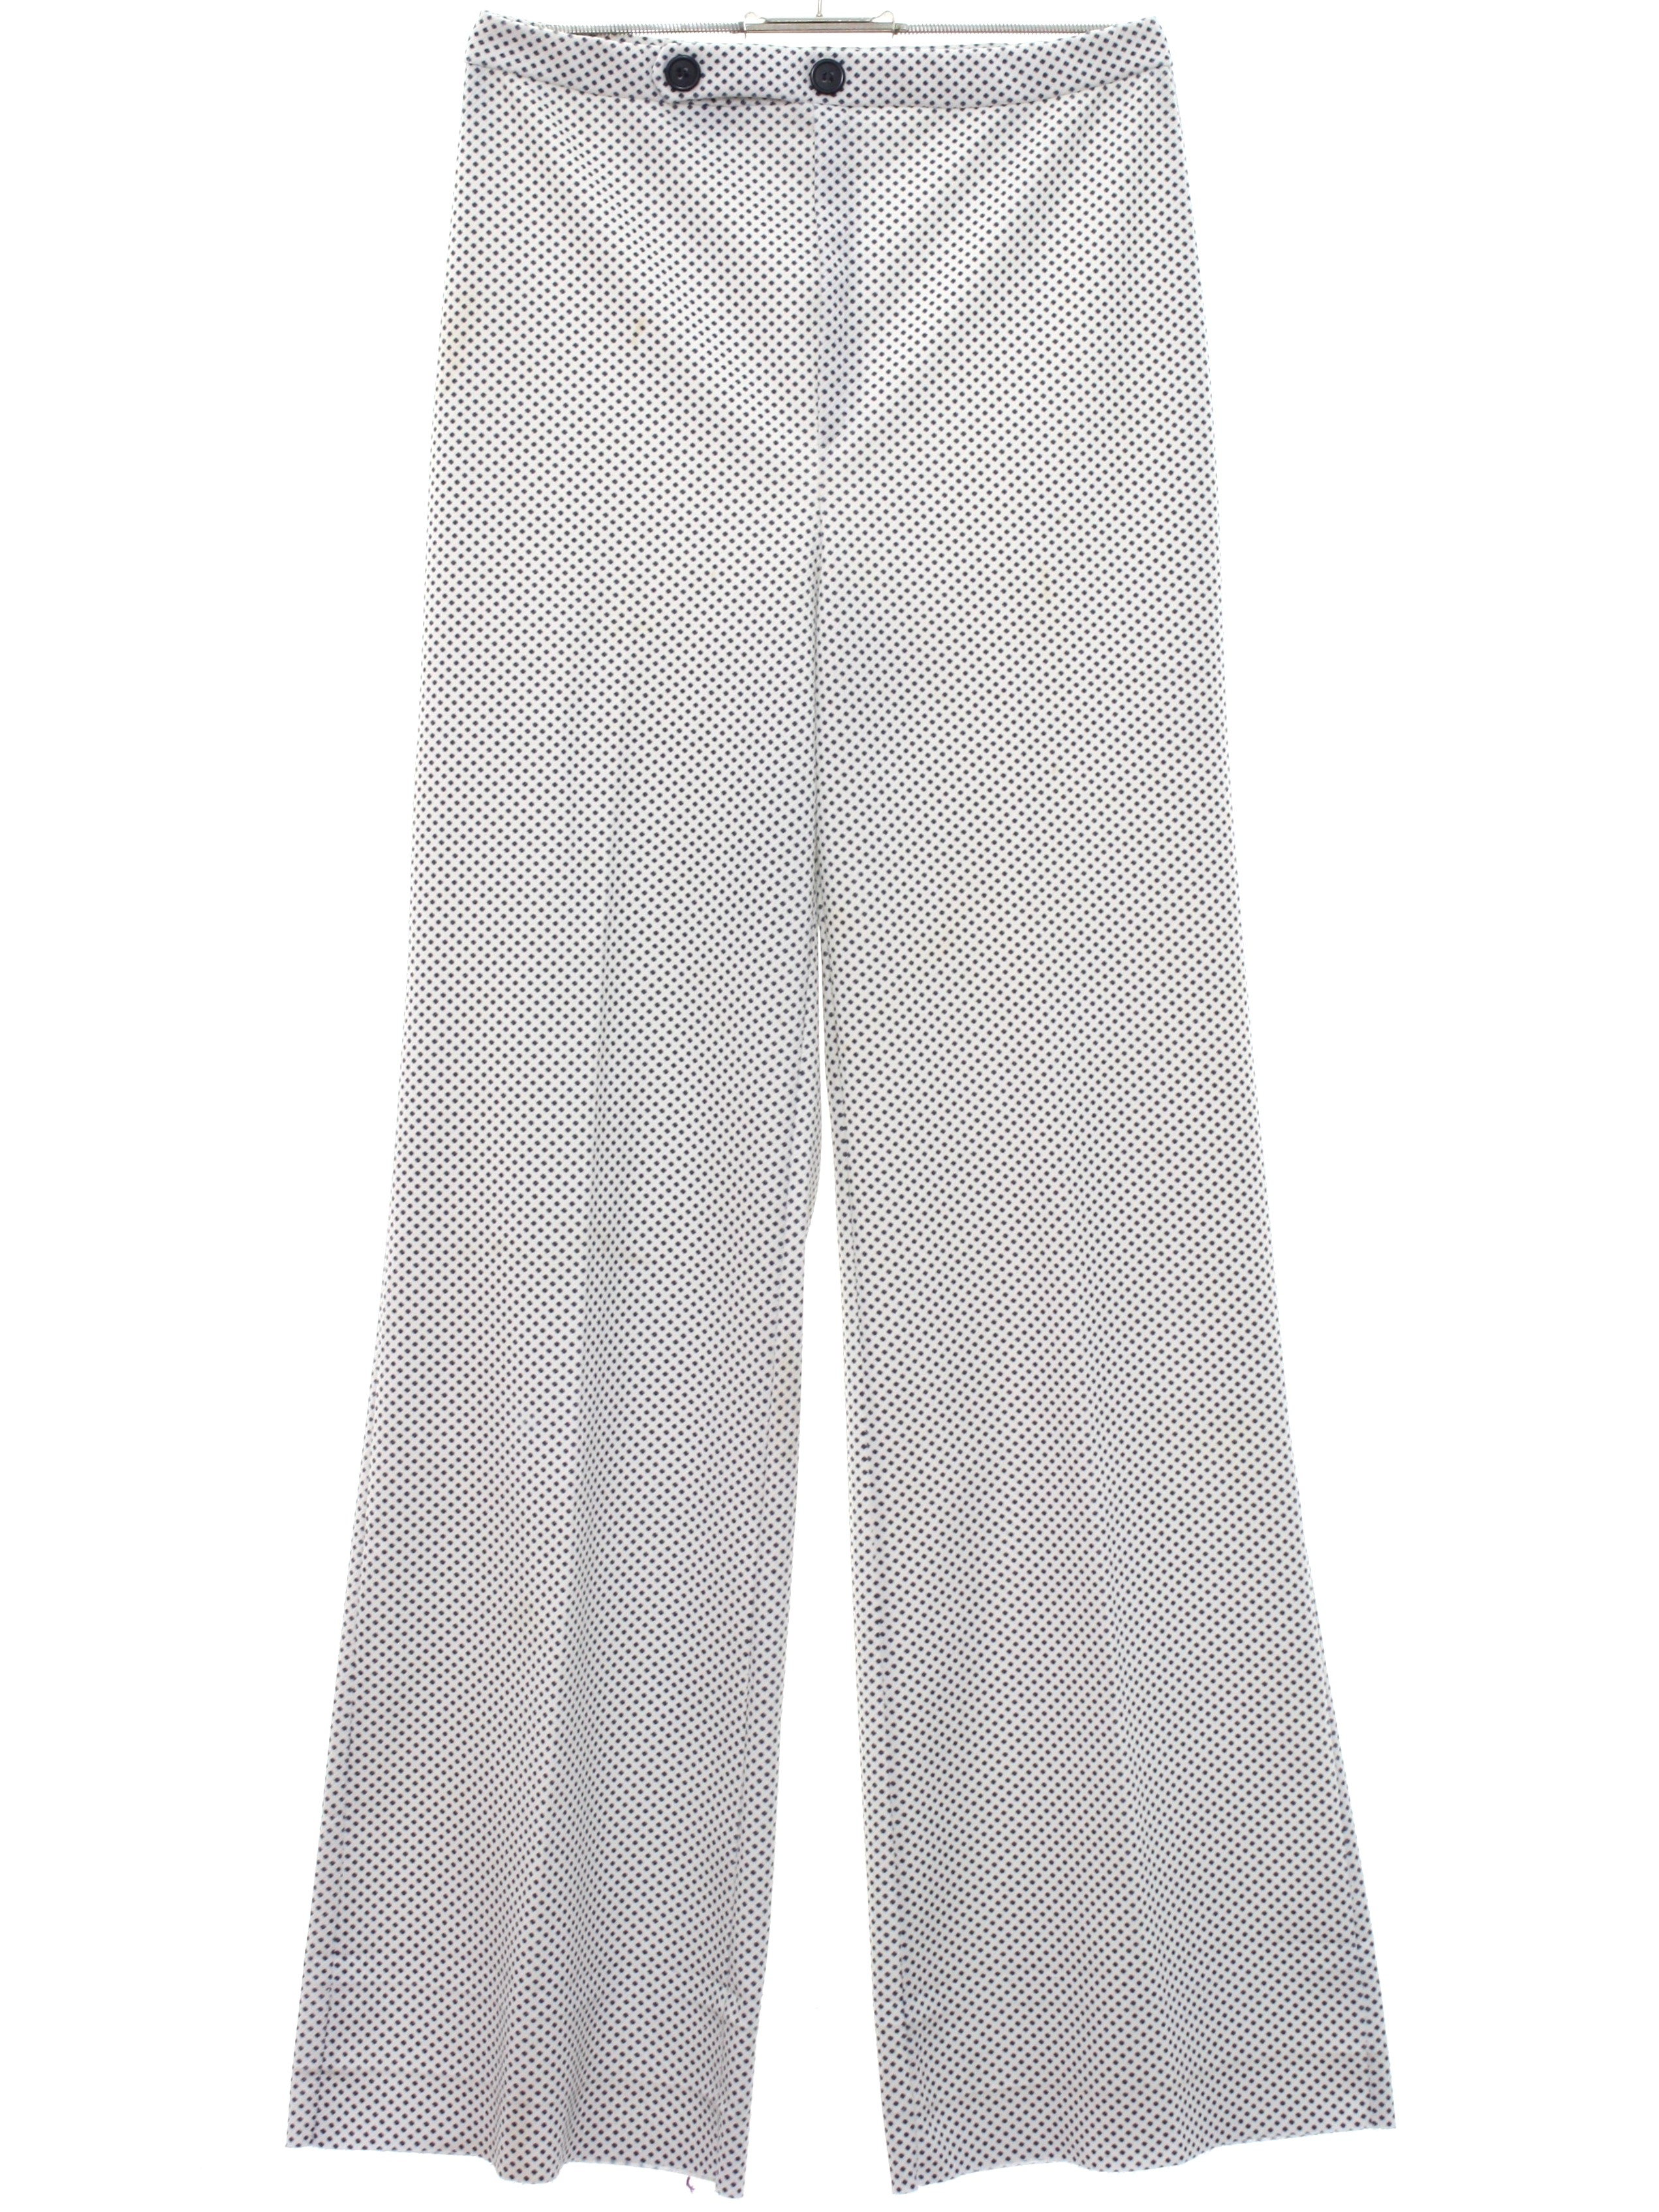 1970s Jack Winter Bellbottom Pants: 70s -Jack Winter- Mens white with ...